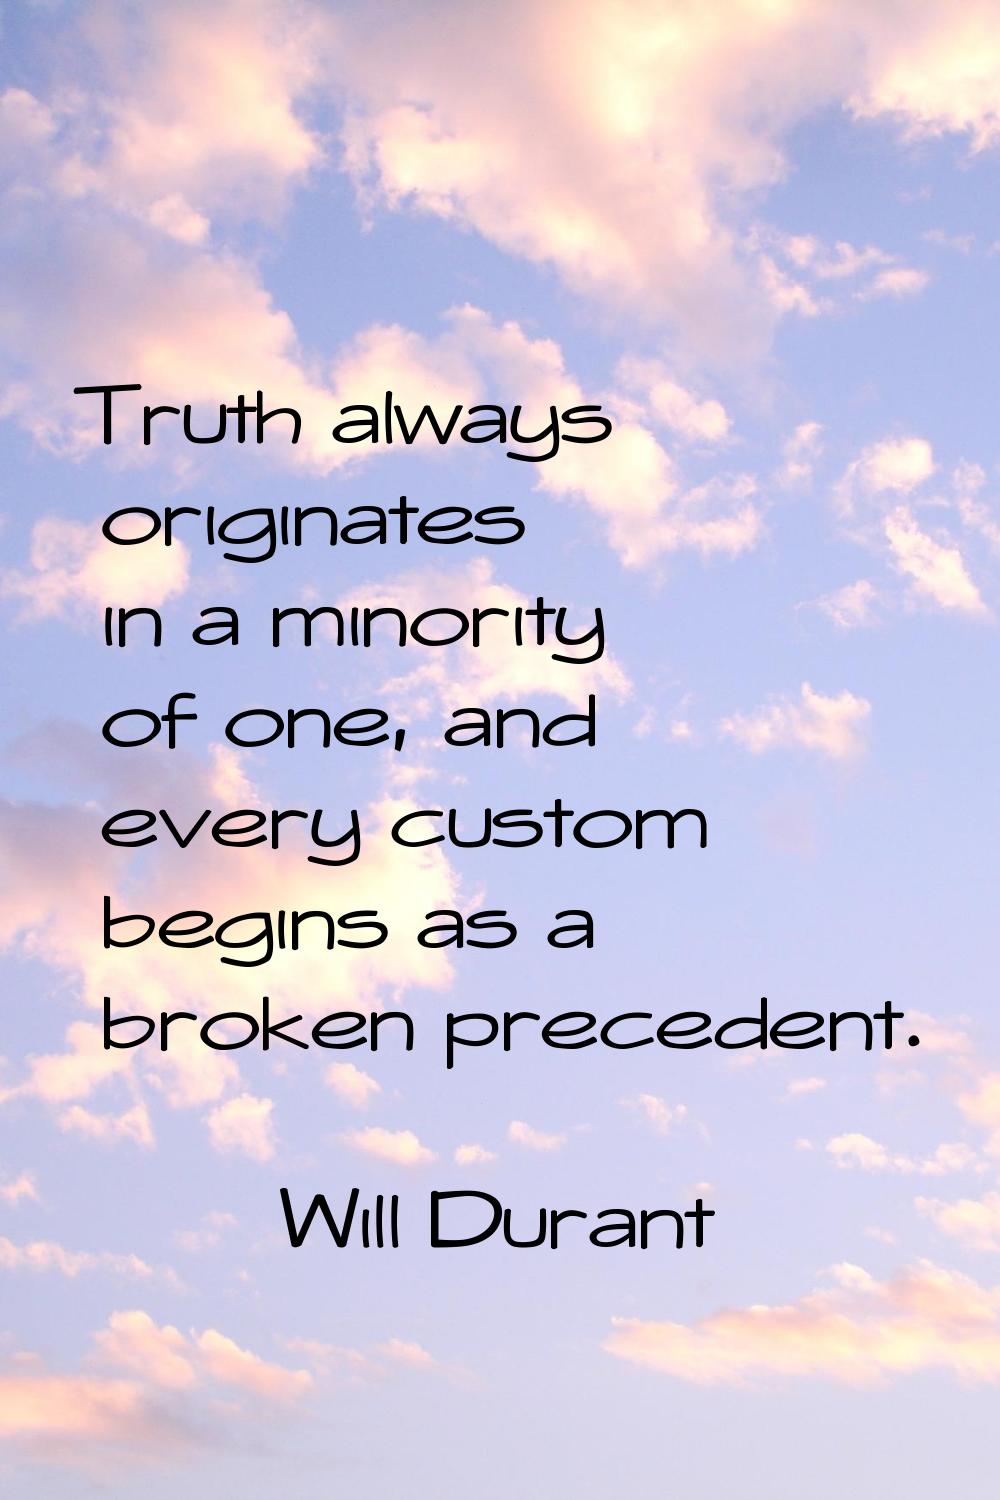 Truth always originates in a minority of one, and every custom begins as a broken precedent.